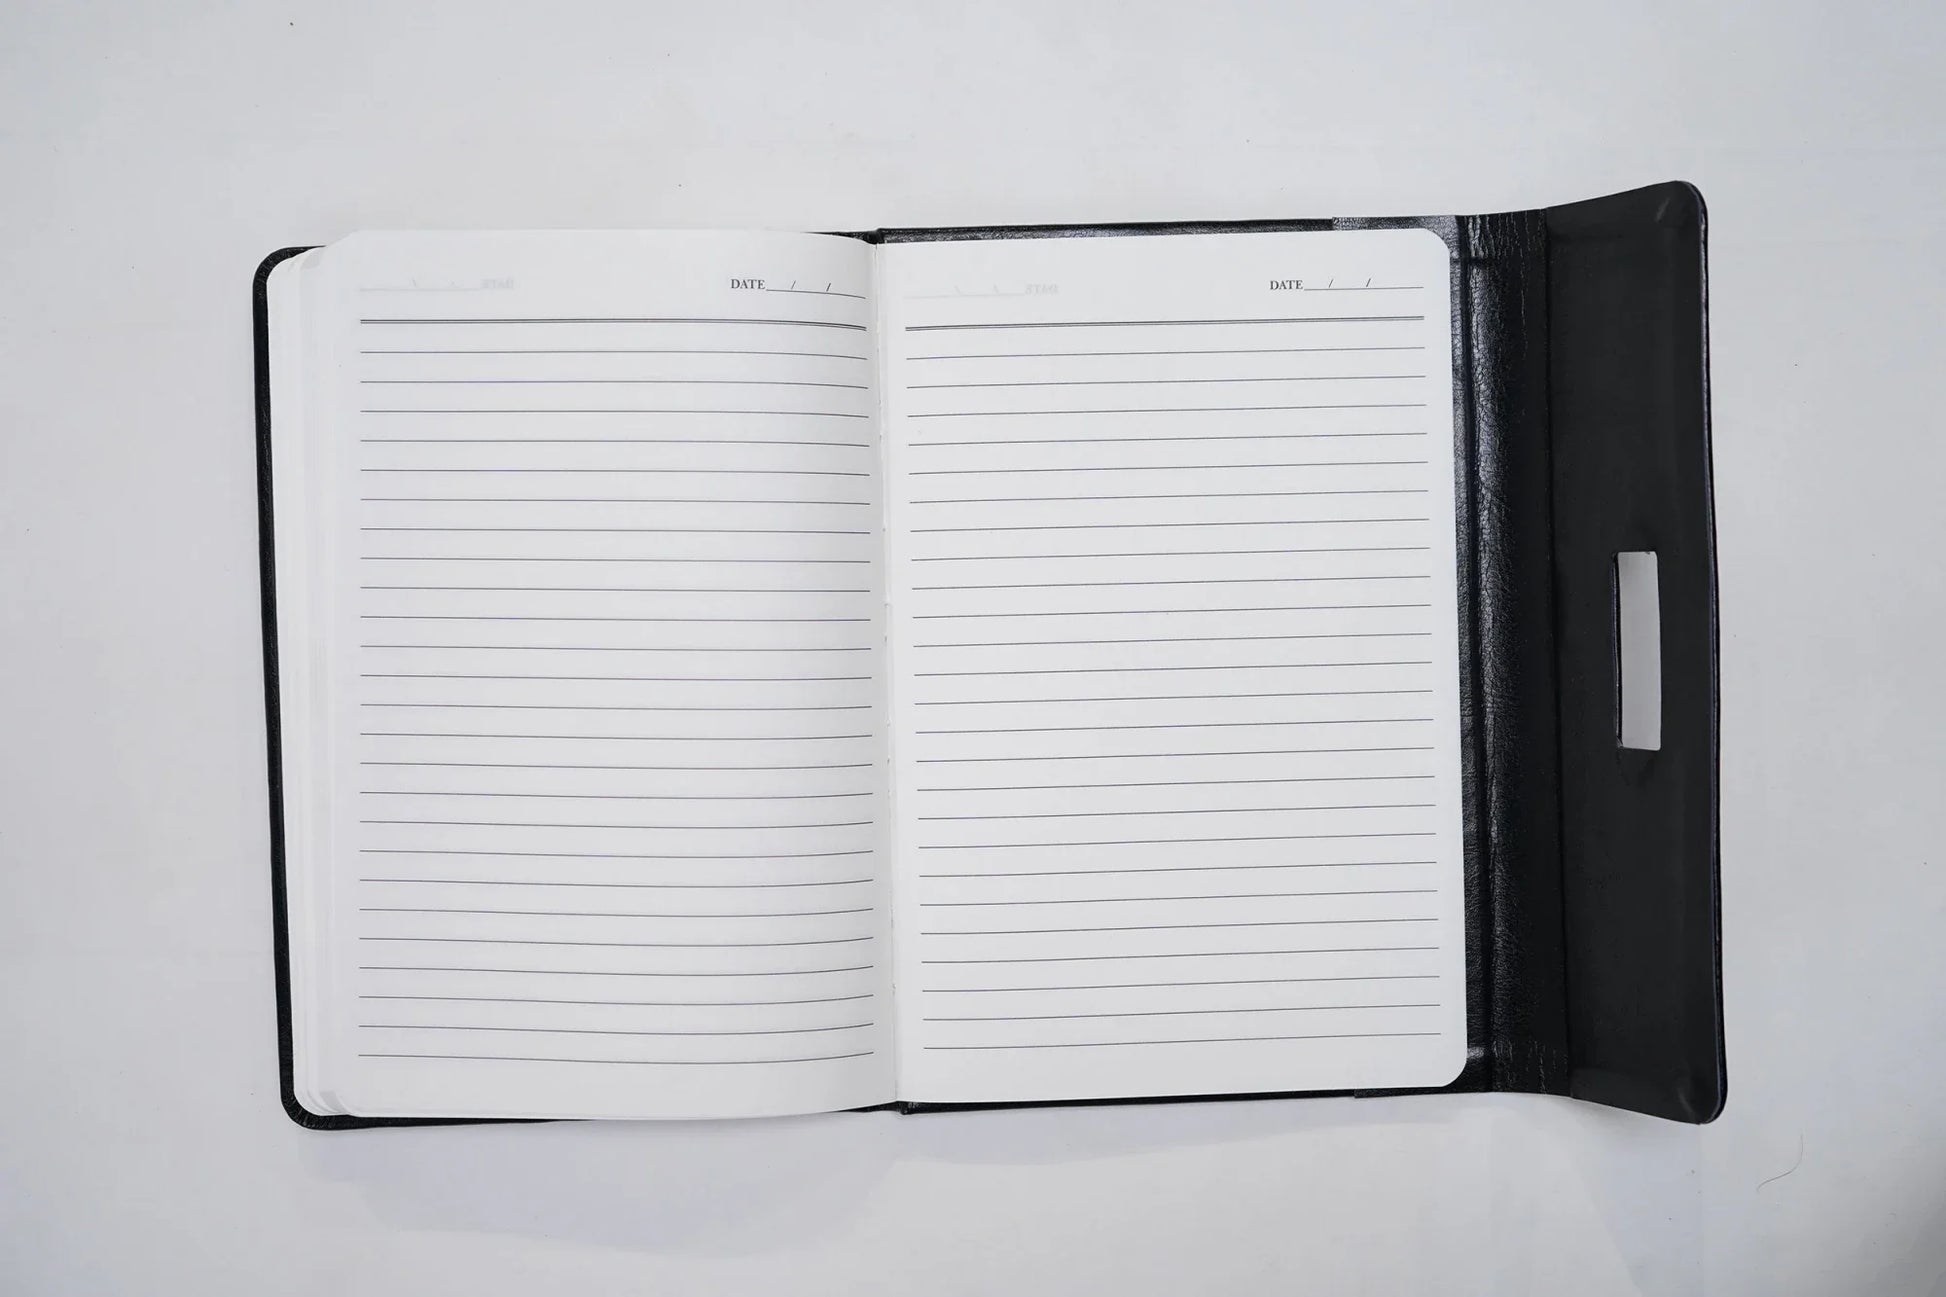 Whether you are a seasoned journaler or just looking for a place to capture your daily musings, our diary is the perfect choice. With its beautiful leather cover and smooth pages, this diary is the perfect place to store your memories and thoughts.